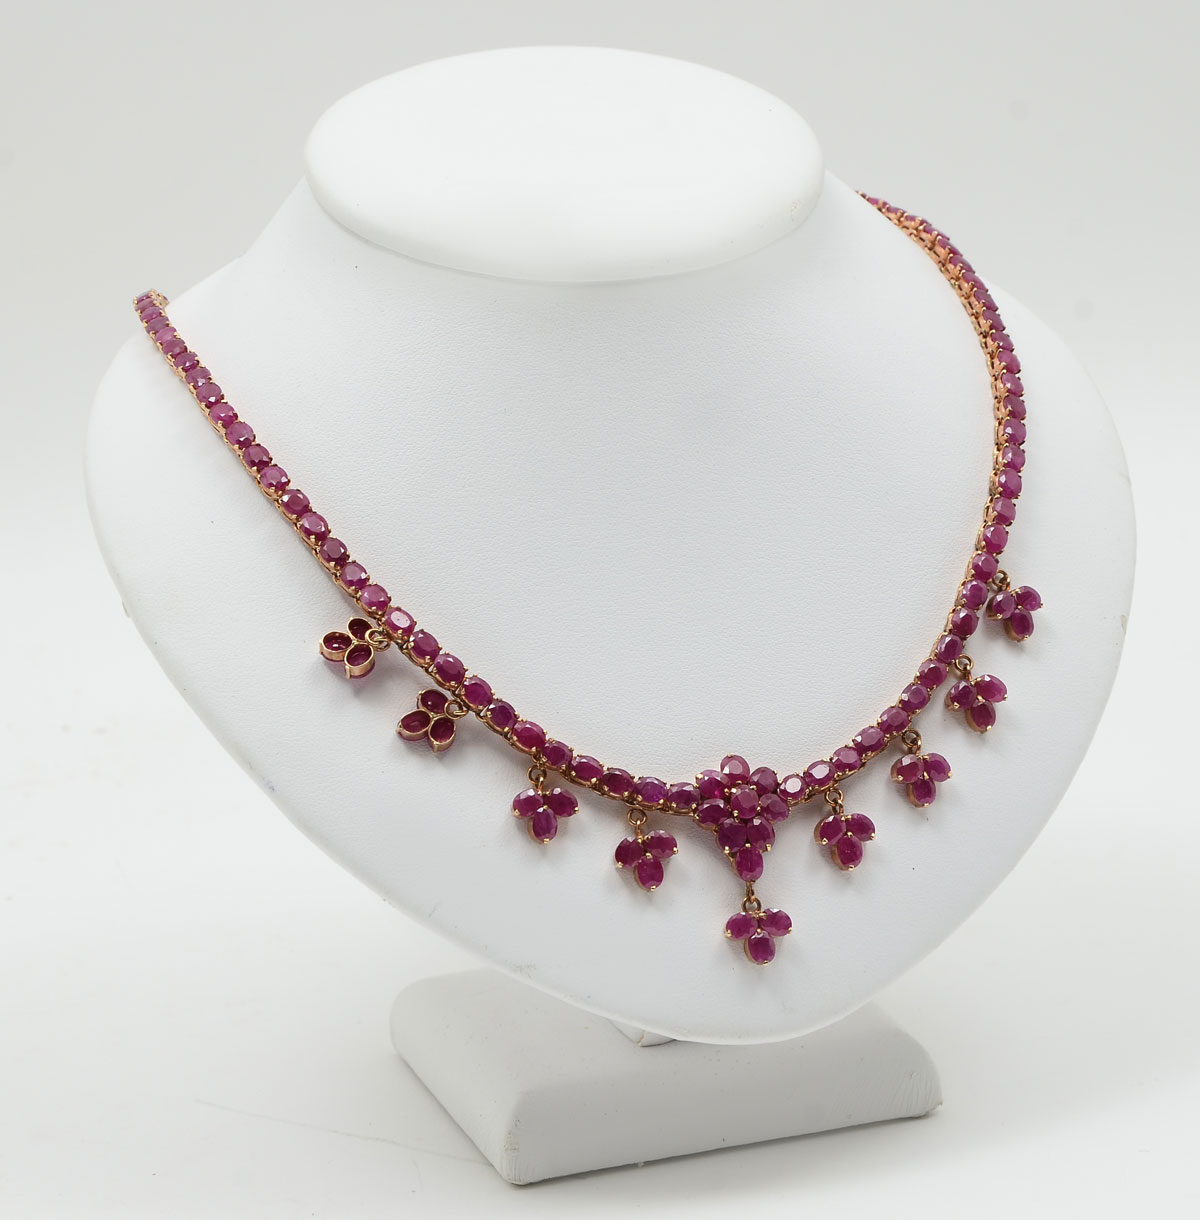 14K RUBY NECKLACE: 14K yellow gold